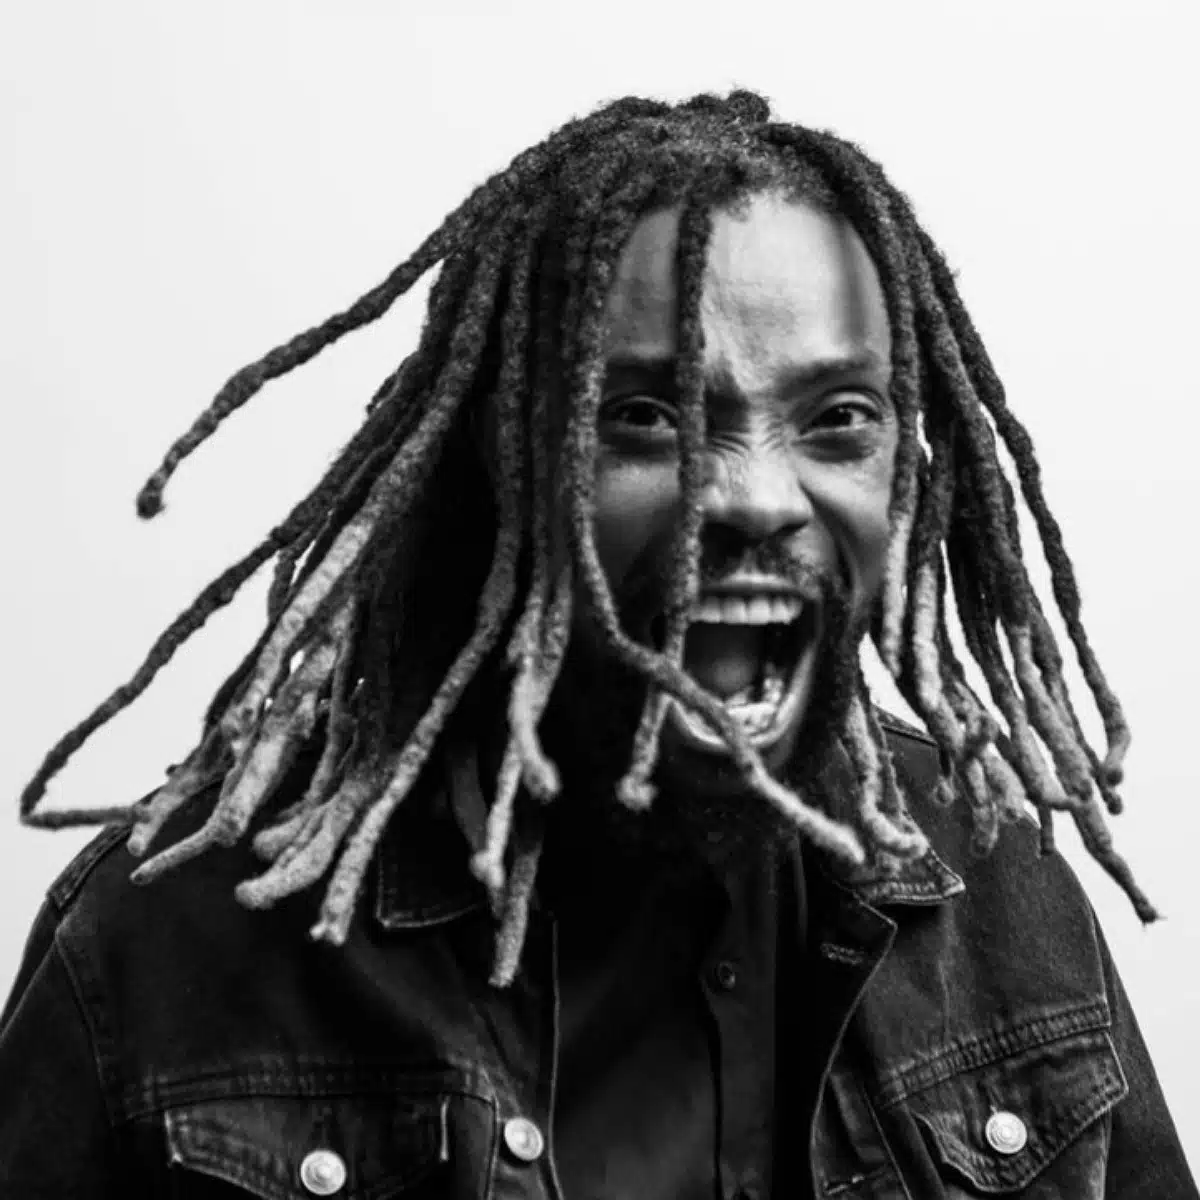 Jay Rox’s Passion for Promoting Umusepela Chile’s Music